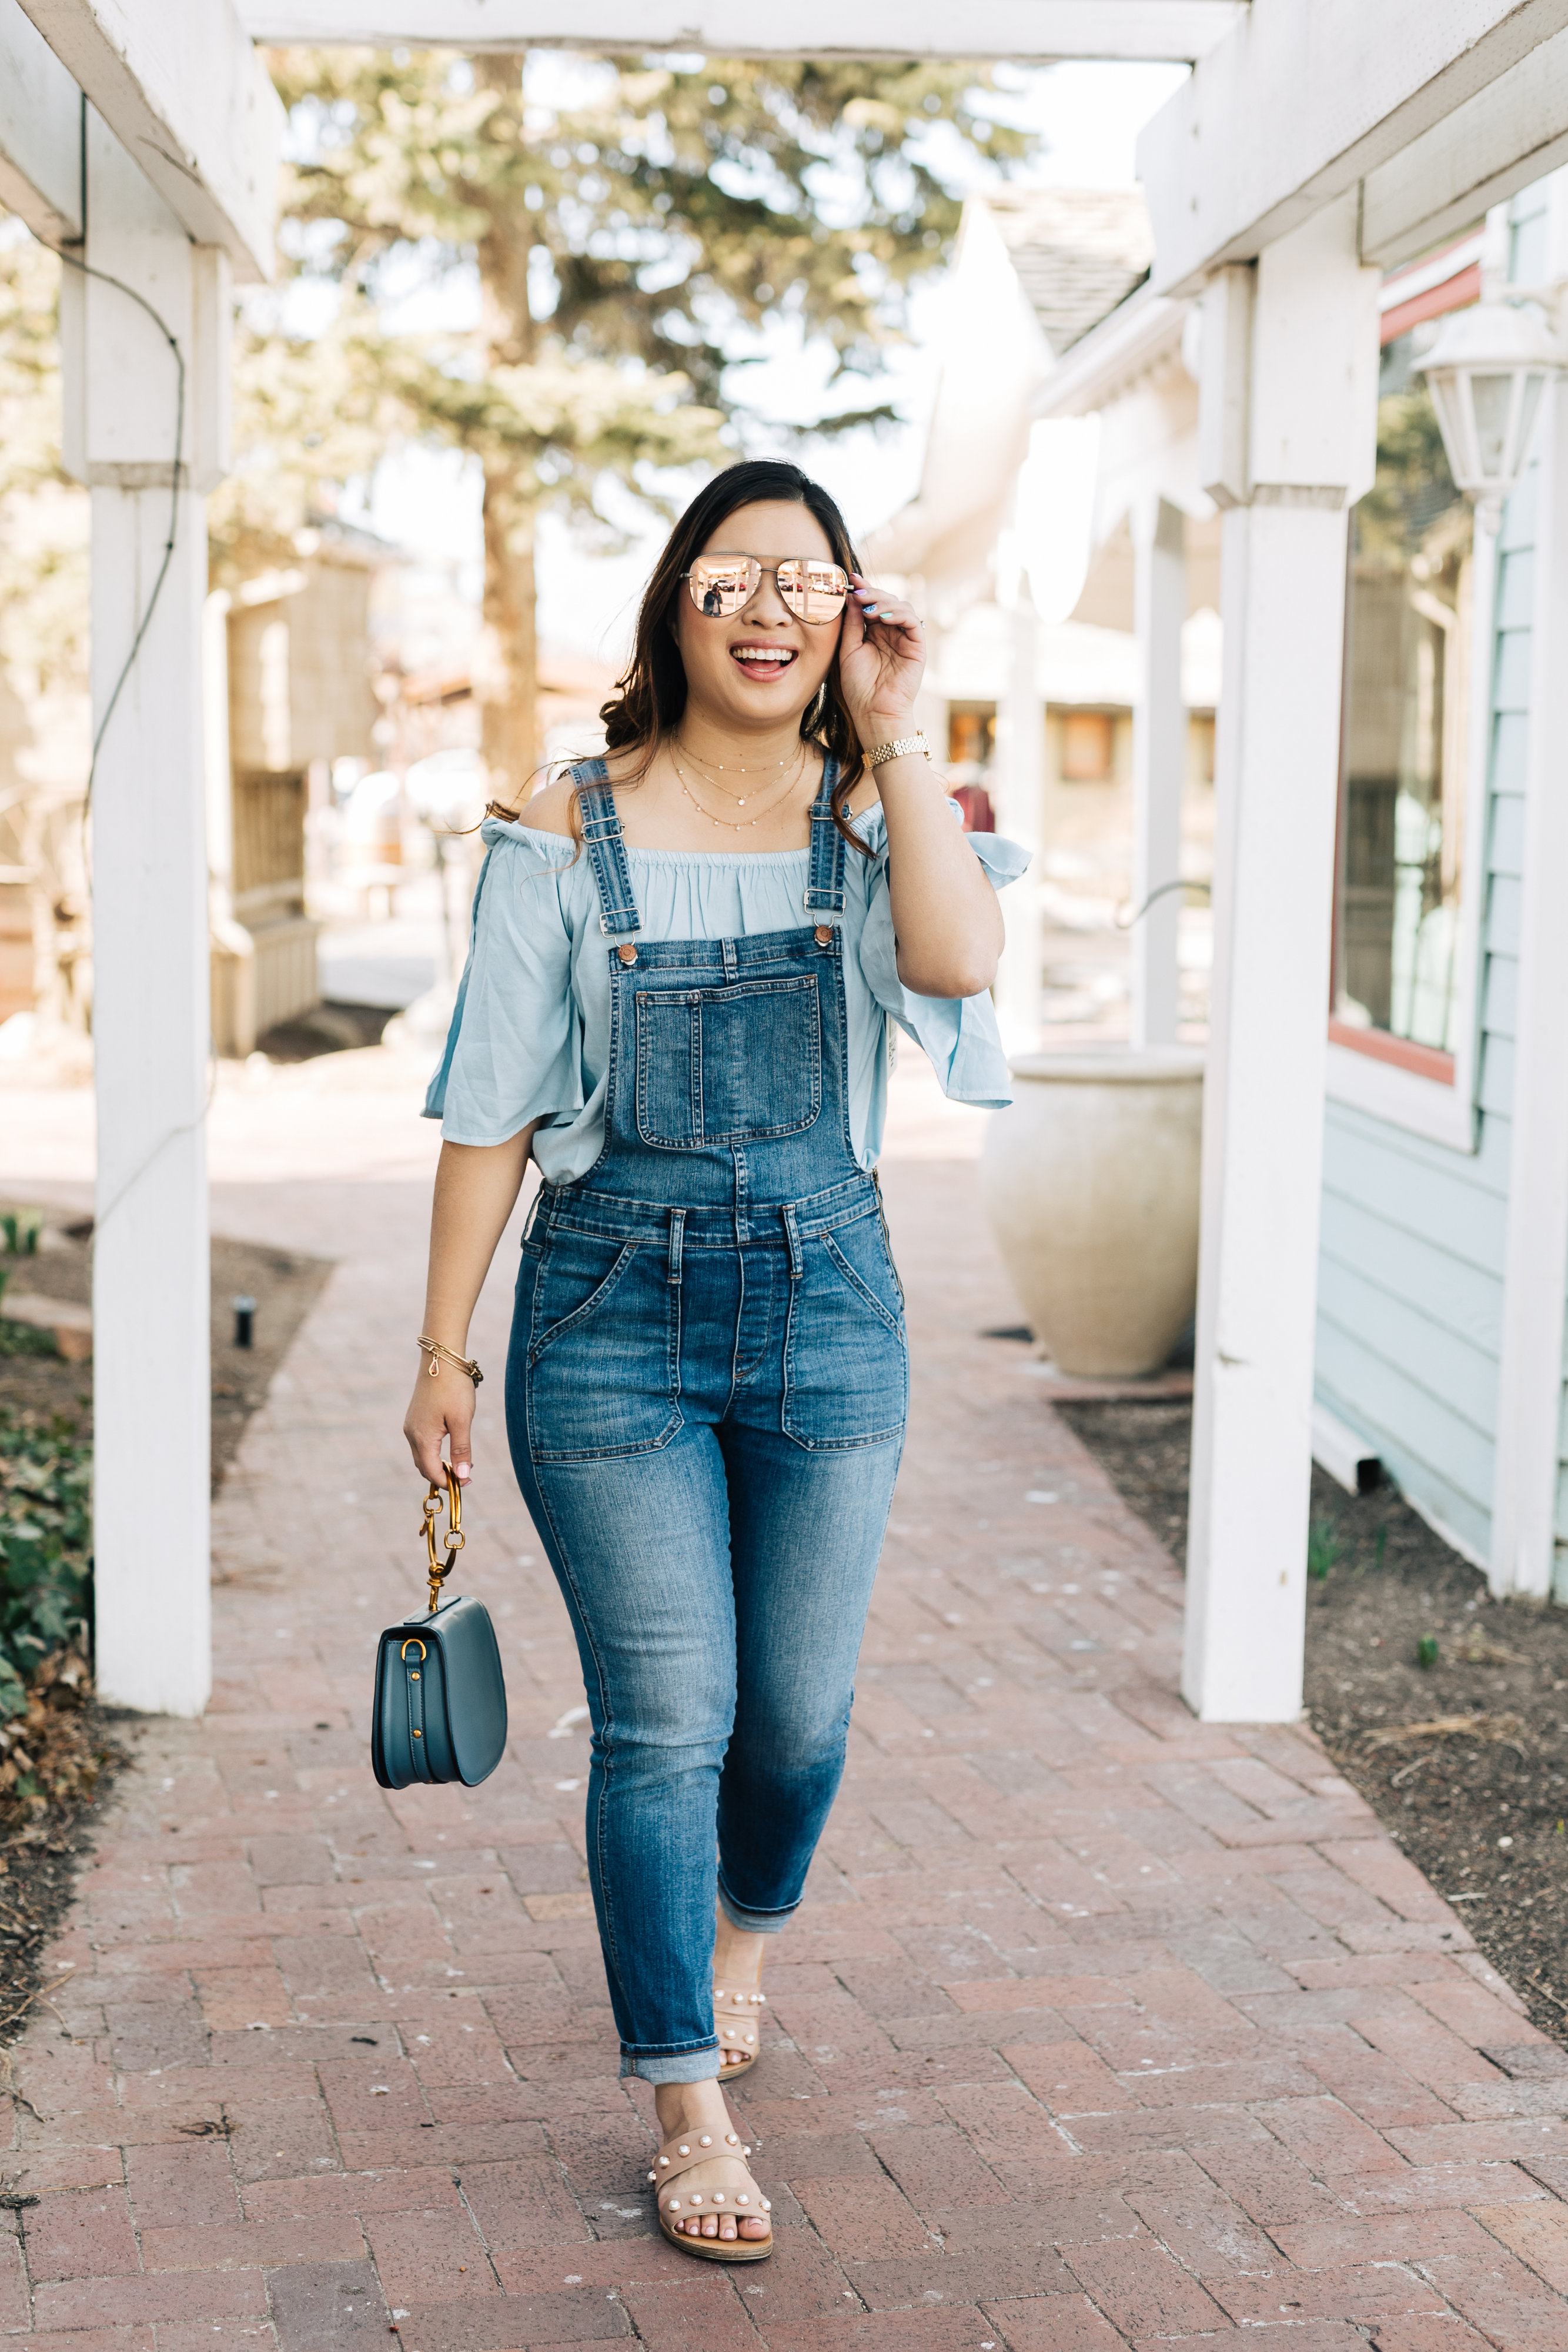 LA by Diana - Personal Style blog by Diana Marks: Denim Dungarees